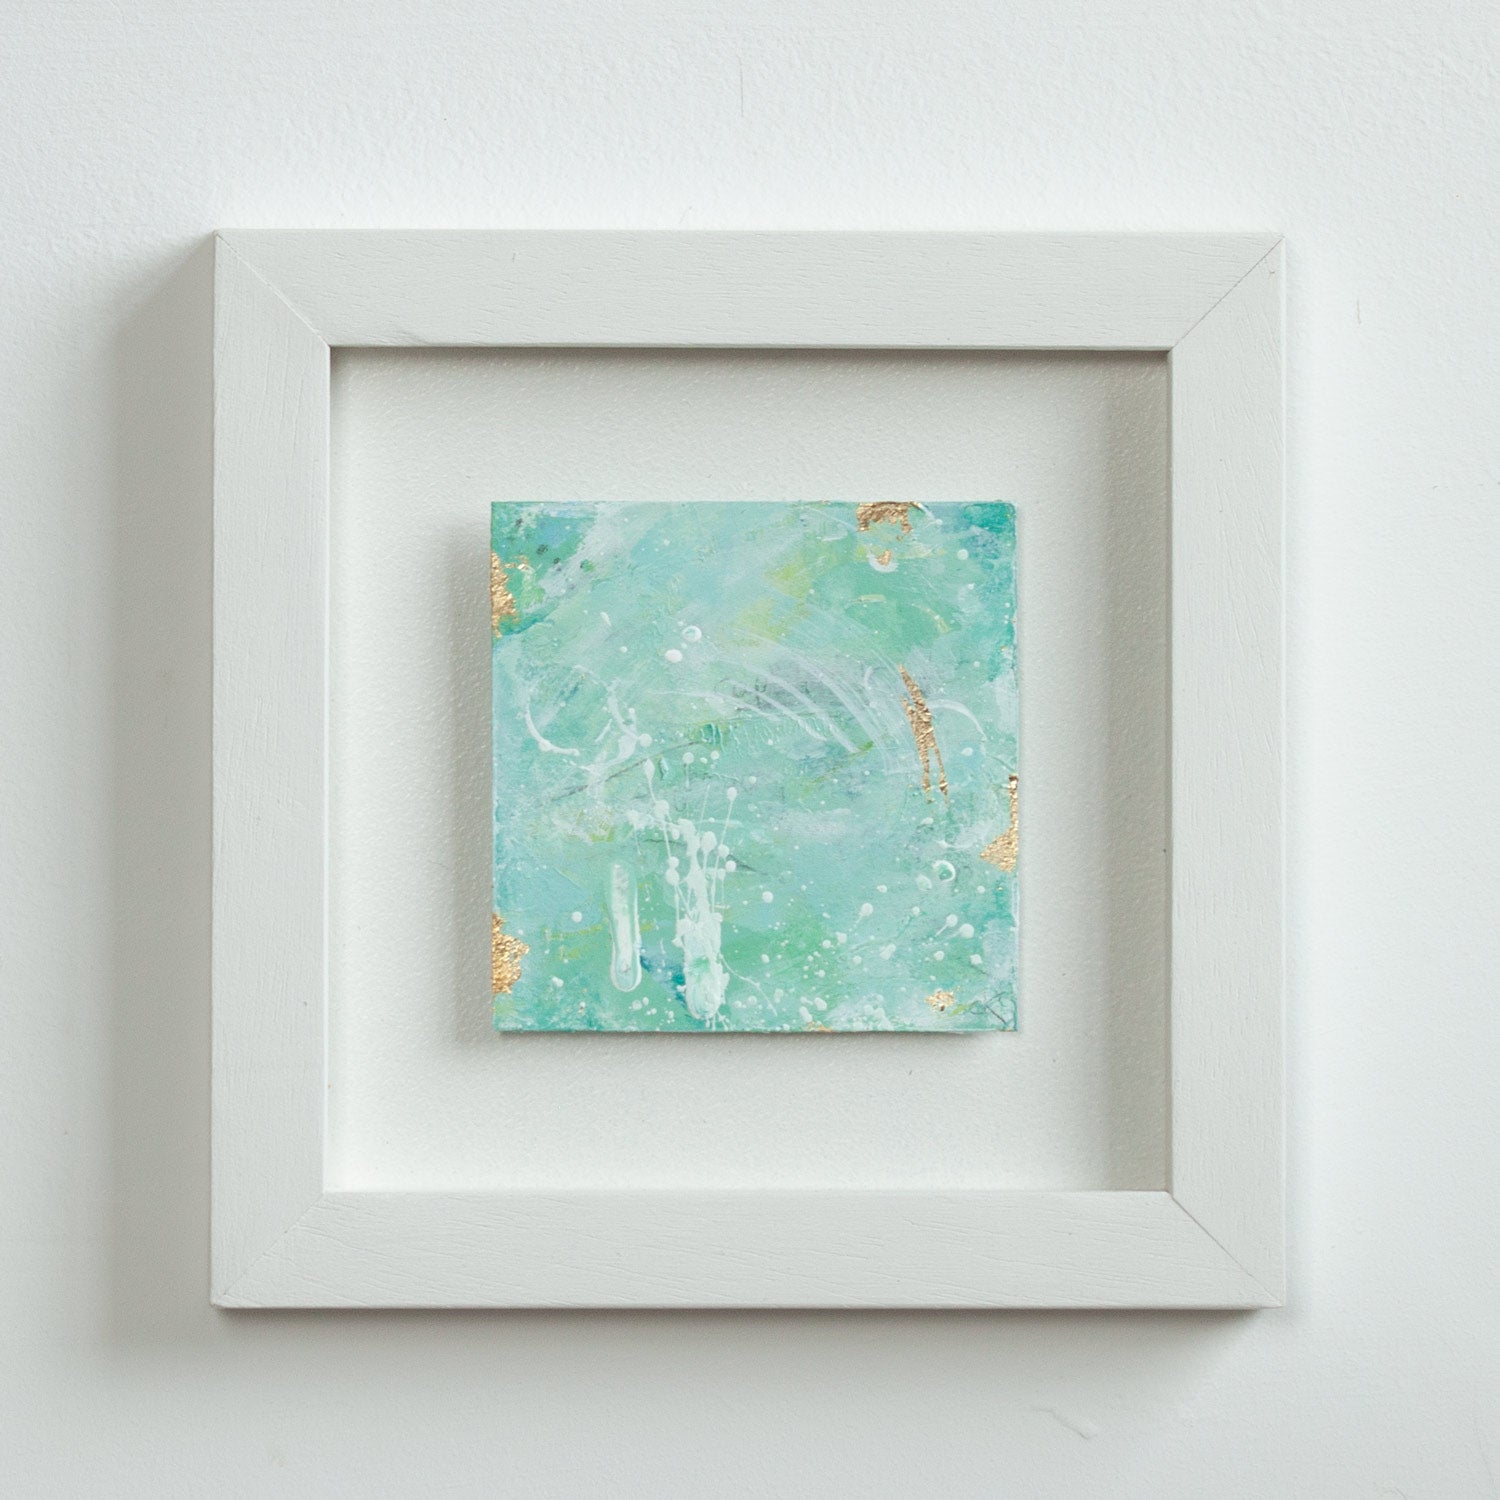 Captivated | Green Abstract Landscape Mini Painting 20cm x 20cm